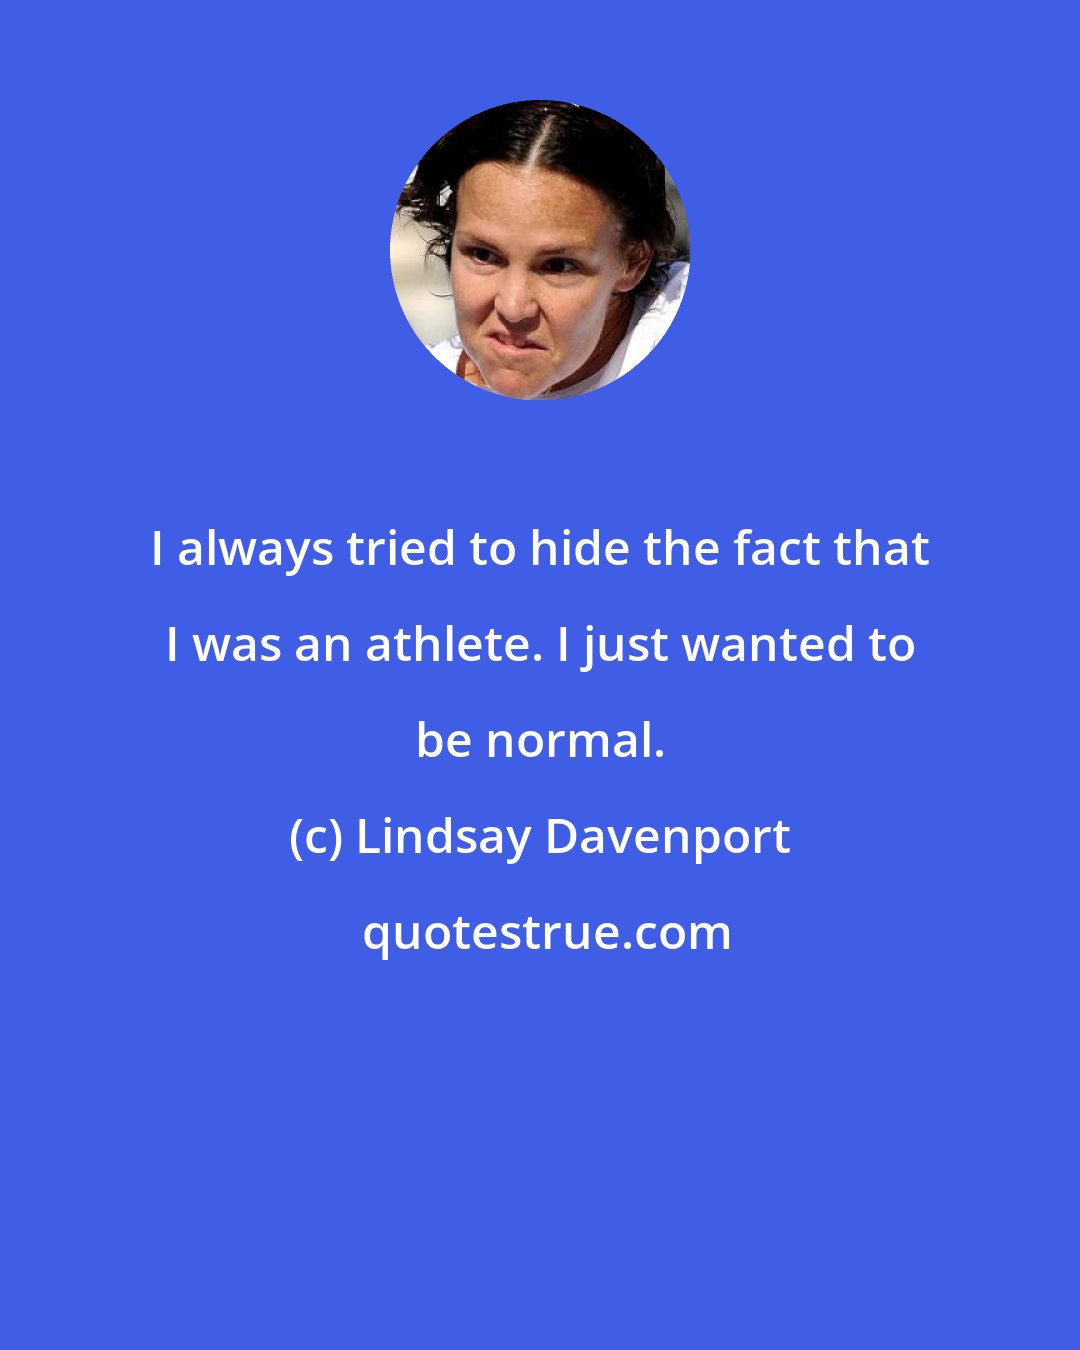 Lindsay Davenport: I always tried to hide the fact that I was an athlete. I just wanted to be normal.